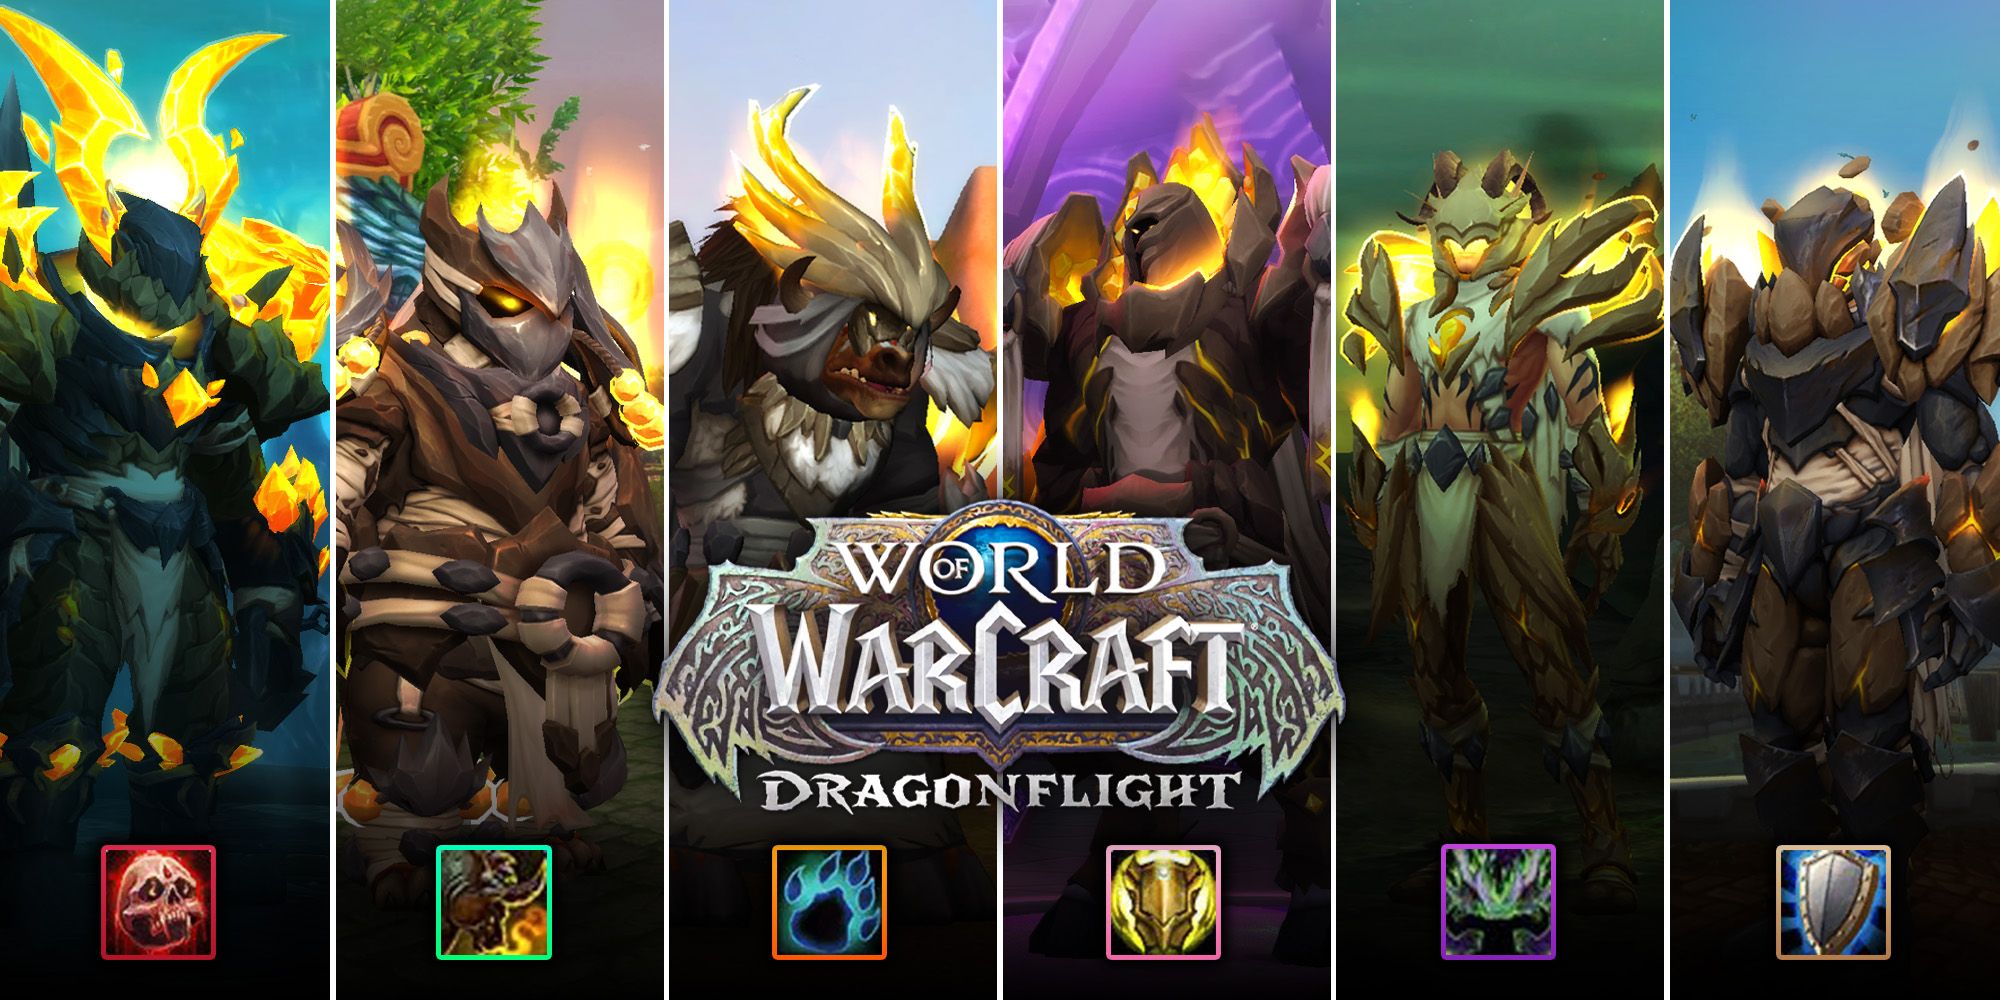 World of Warcraft Ranking Guide » All Current Ranks